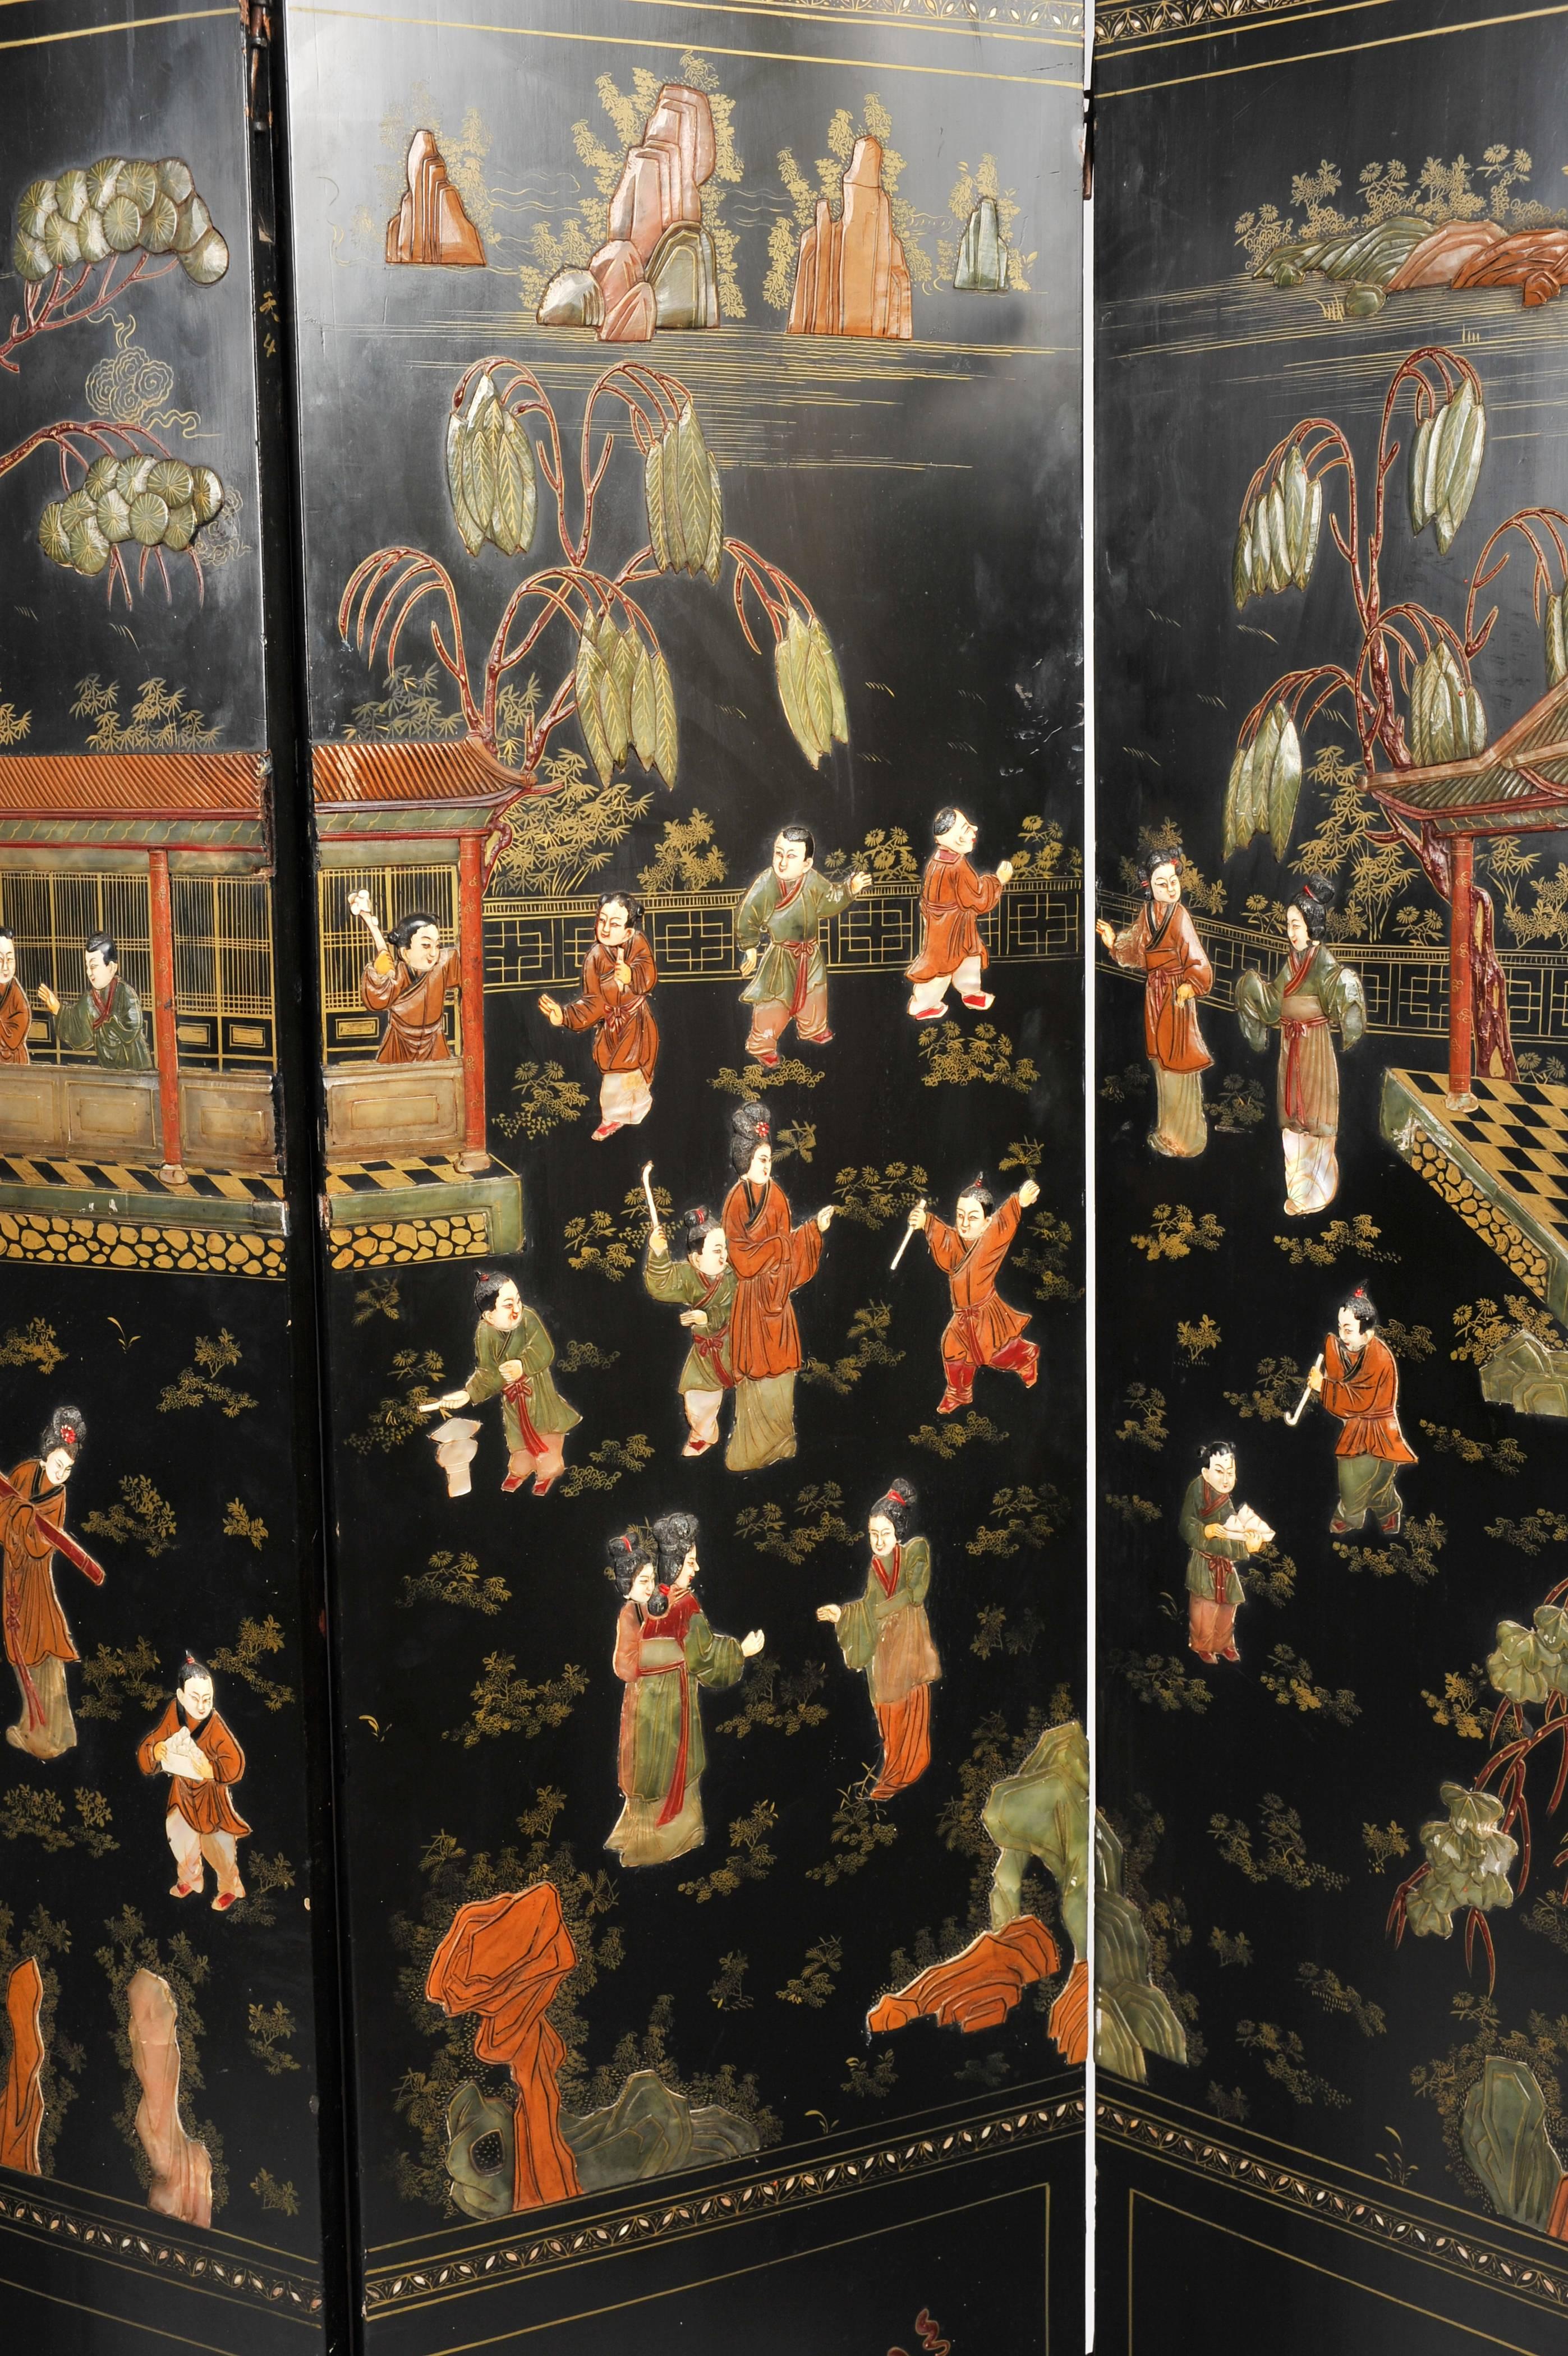 This exquisite and highly ornate 19th century black lacquer Chinese folding screen features 6 panels, each depicting parts of a large outdoor scene of various men and women performing various tasks around a large central house. The design and all